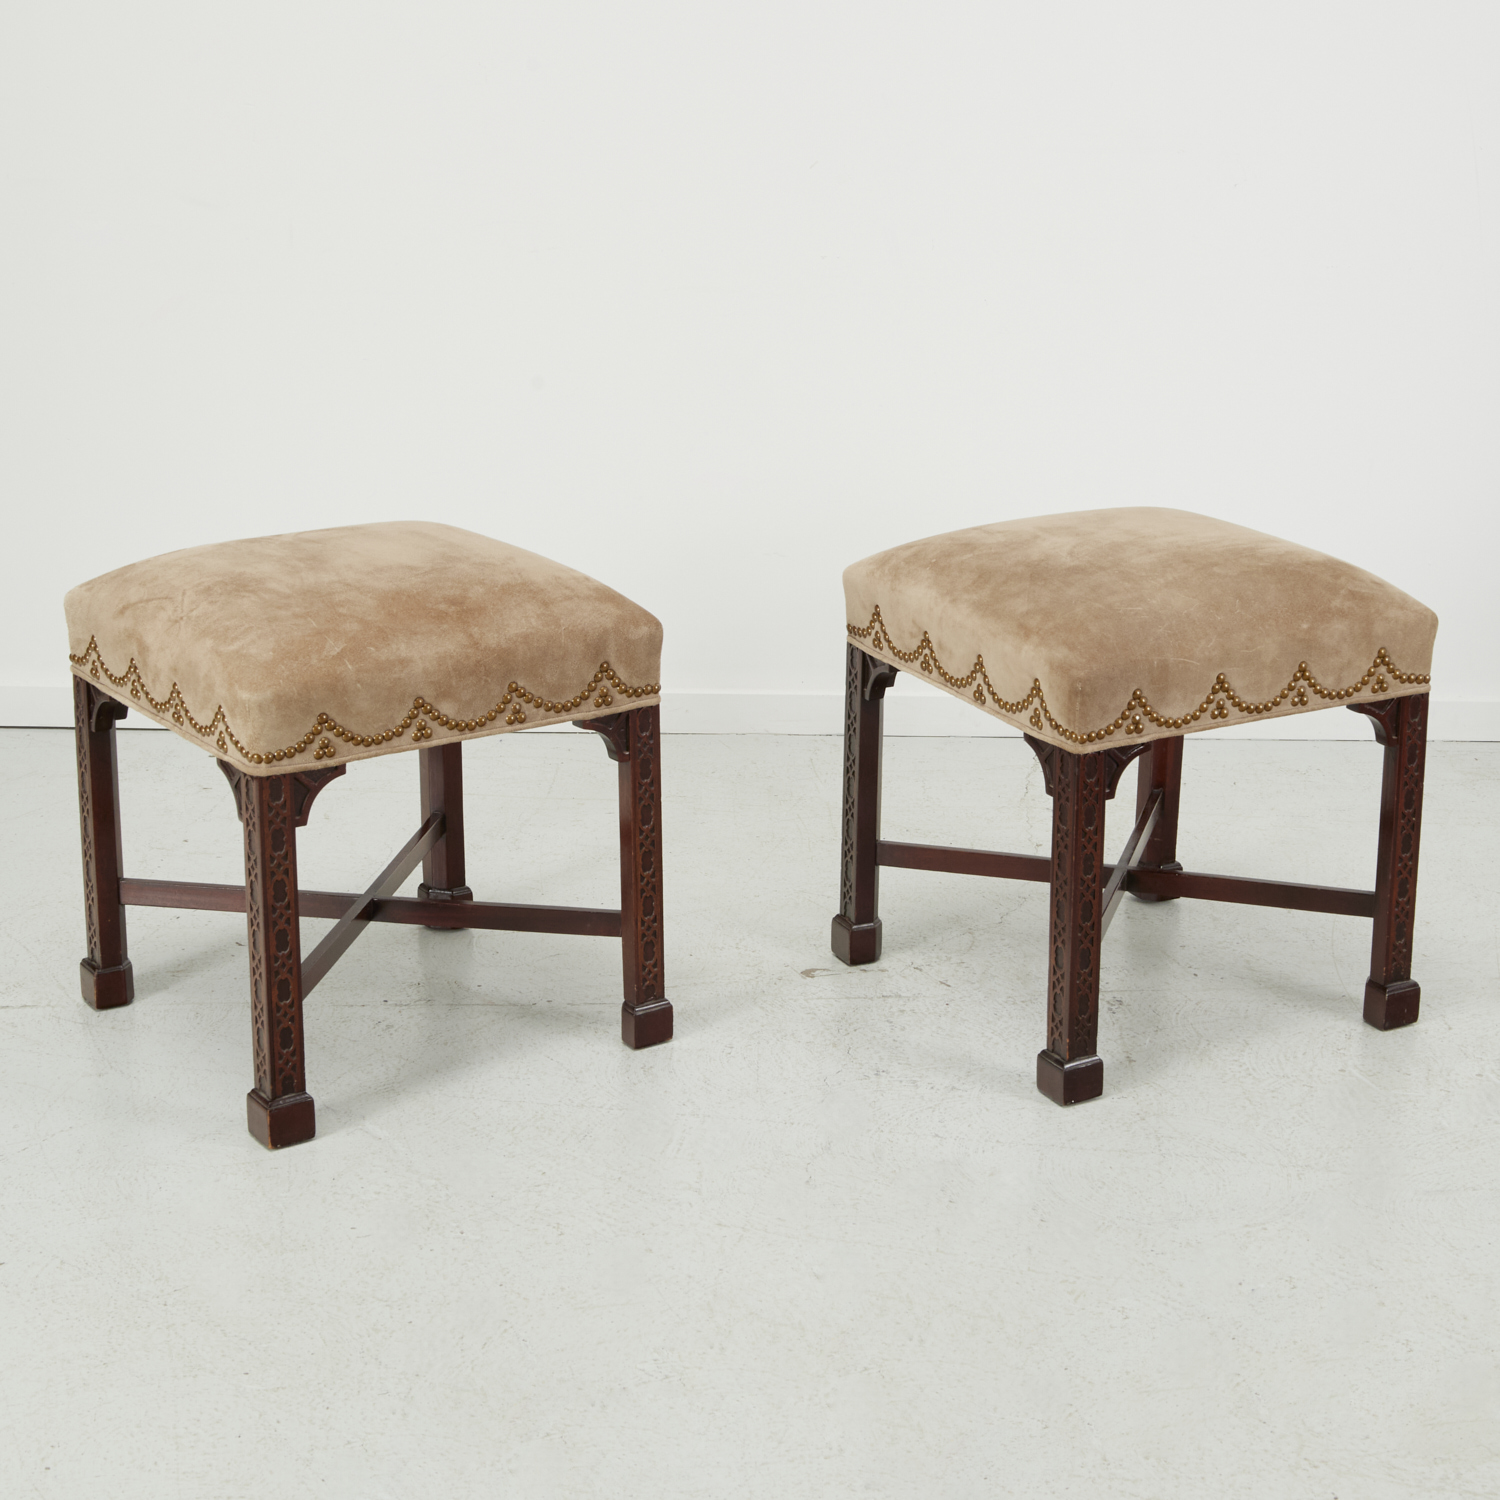 PAIR CHIPPENDALE STYLE SUEDE UPHOLSTERED